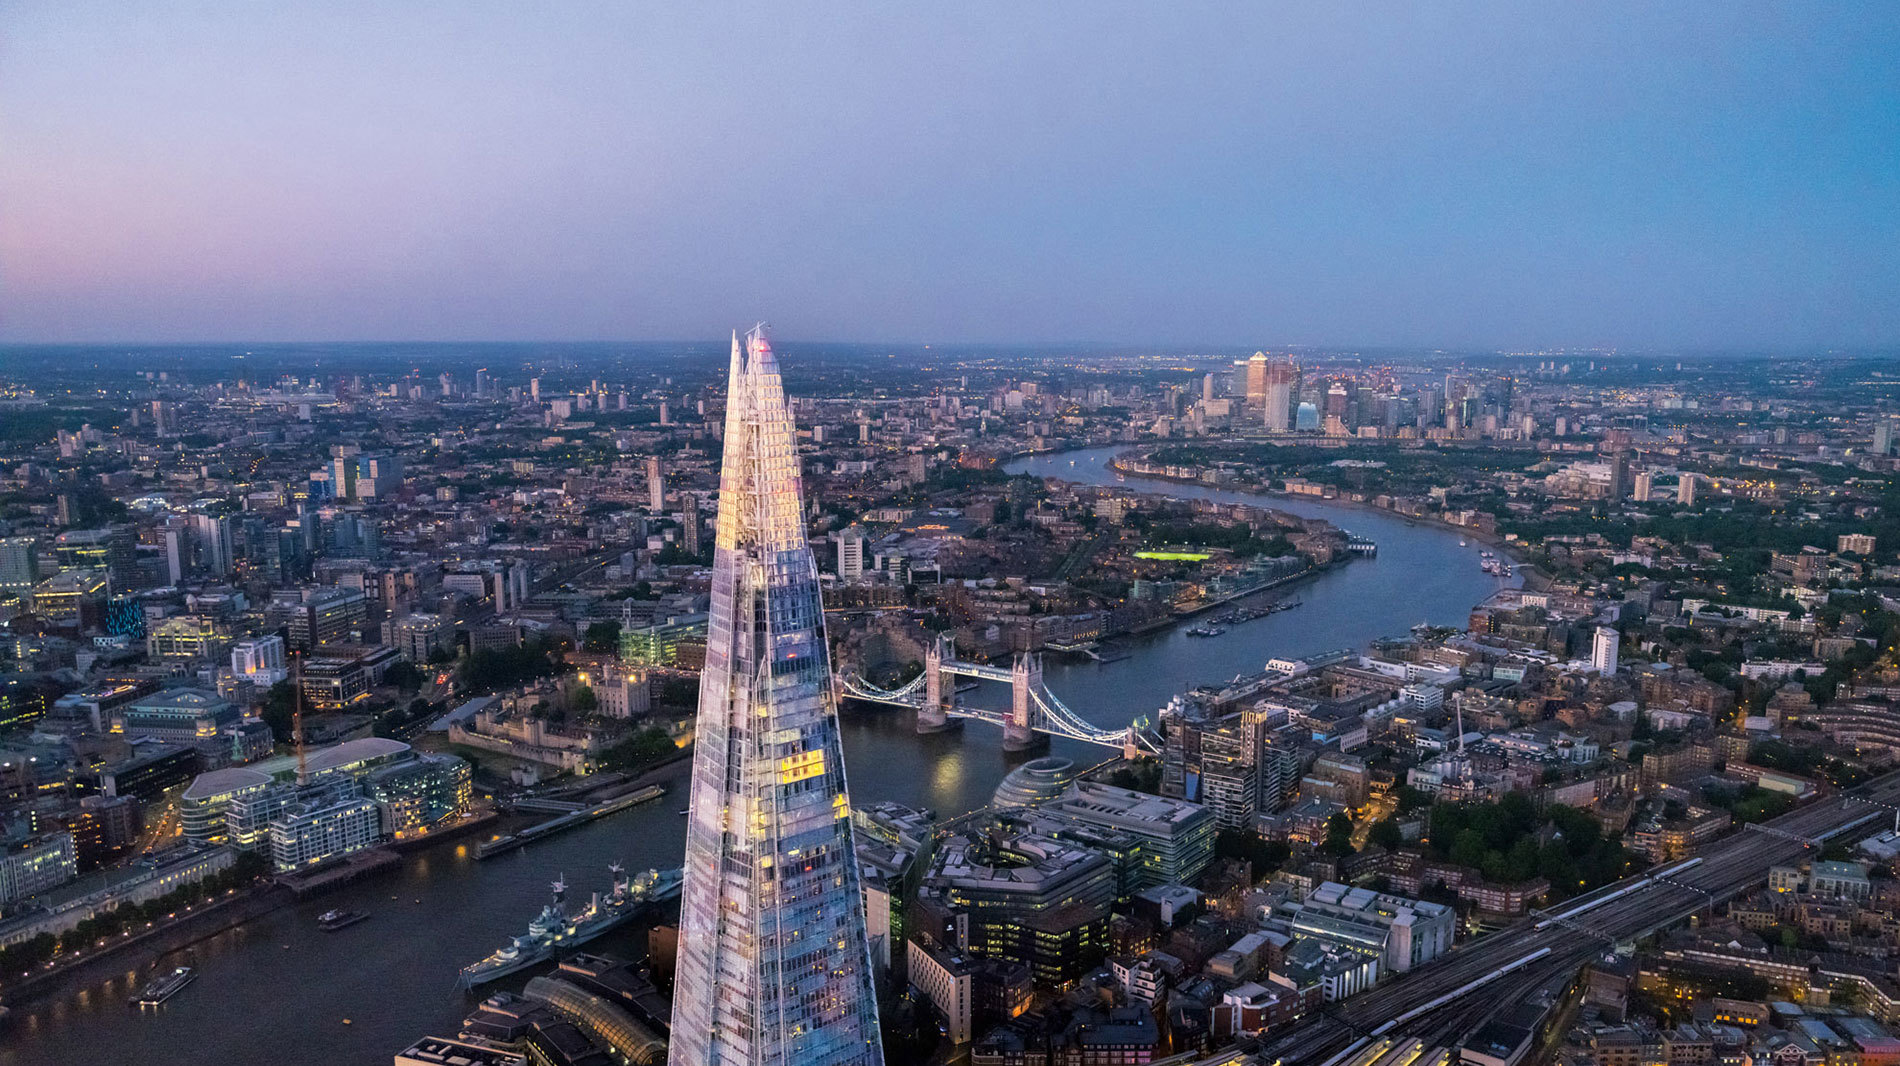 Reigning over London, the Shard is its tallest building, dwarfing earlier icons such as Tower Bridge. More than 70 skyscrapers are under way, promising to redraw the cityscape even further.